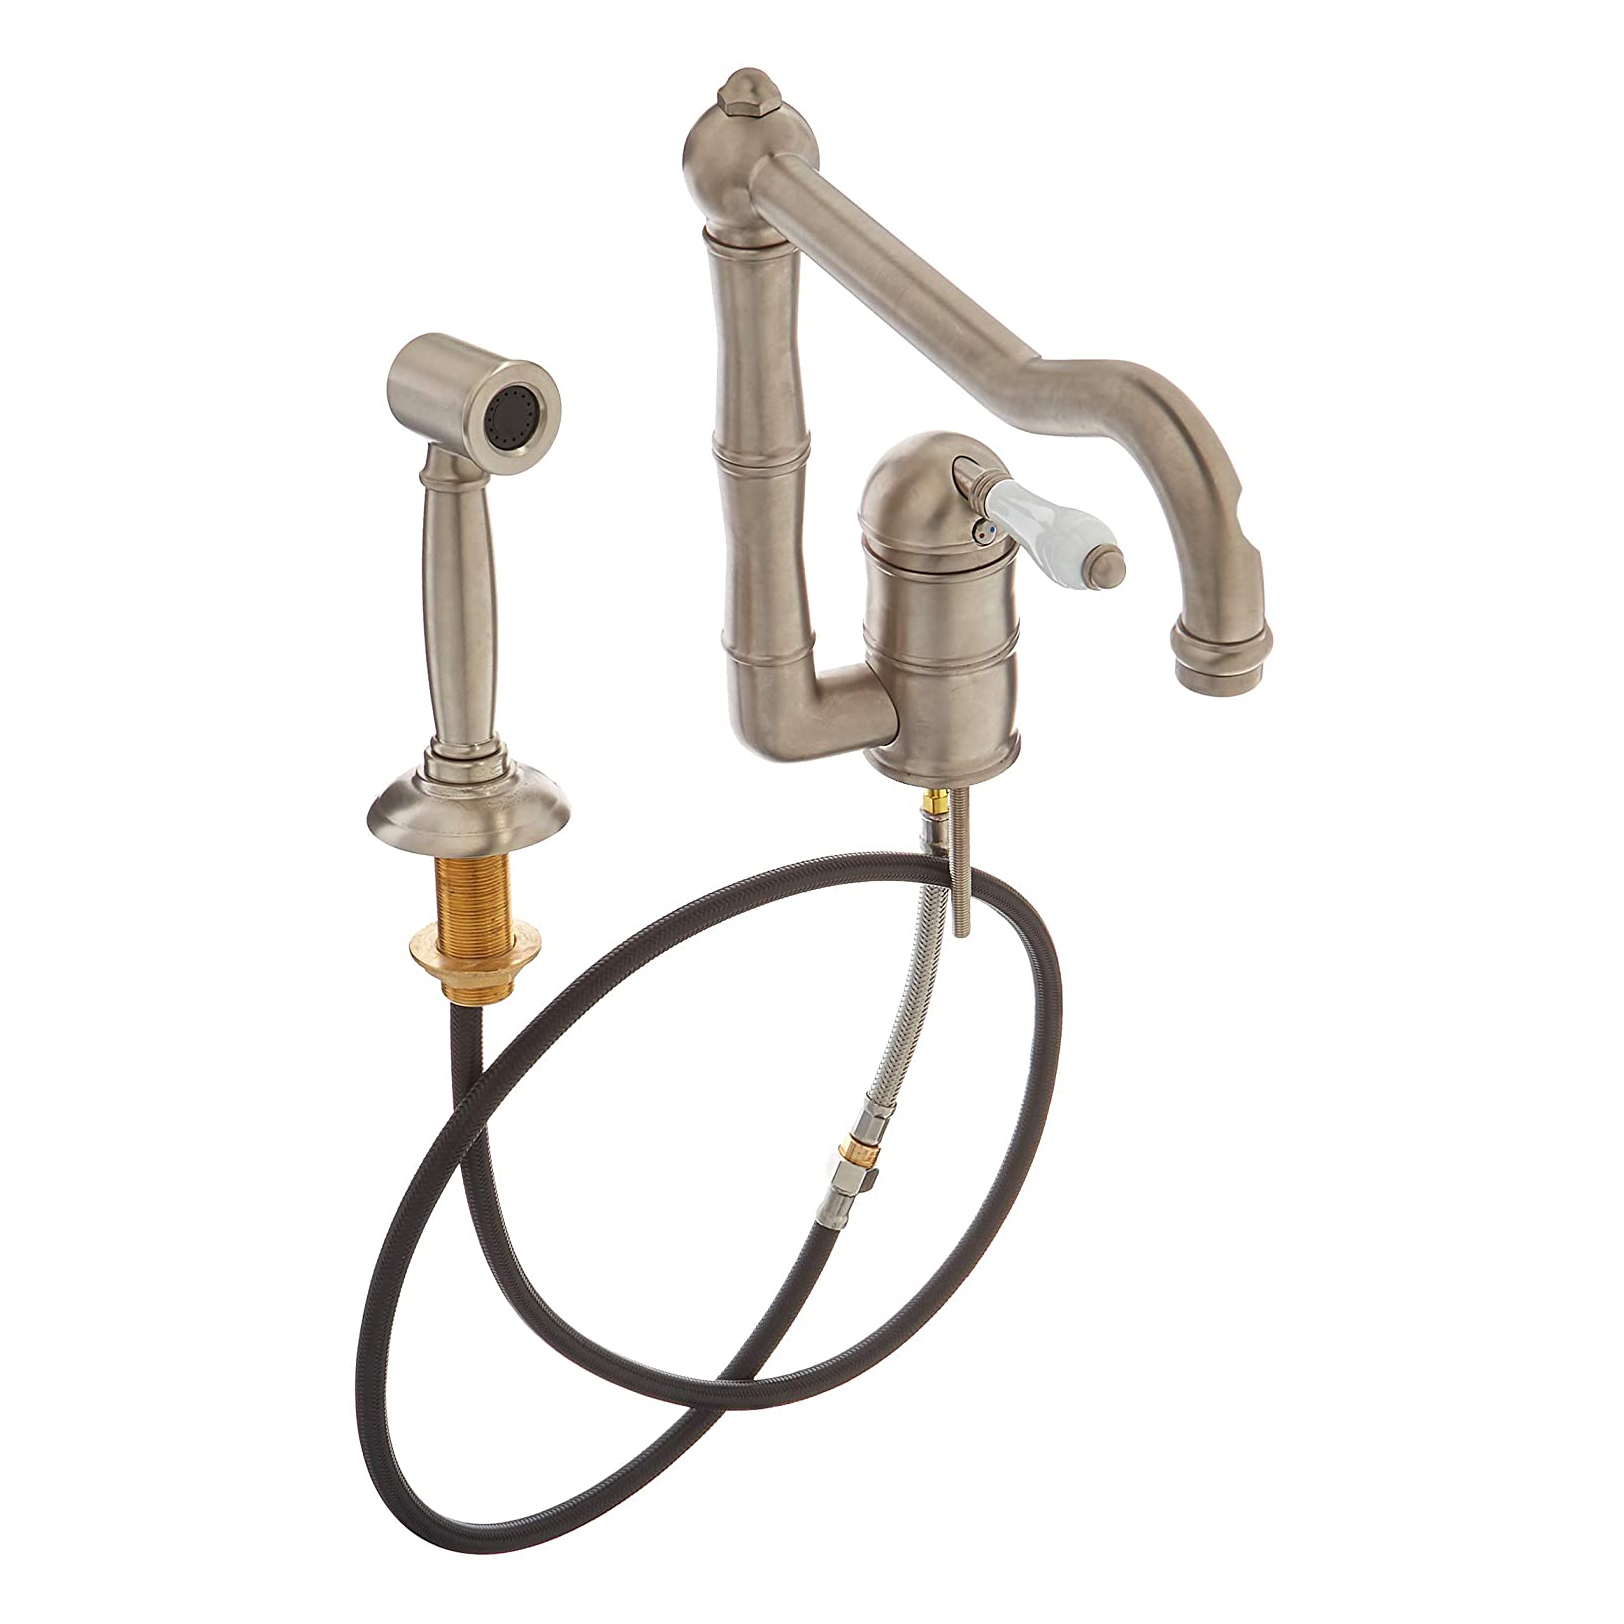 Italian Country Kitchen Faucet in Satin Nickel w/Porcelain Lever & Spray